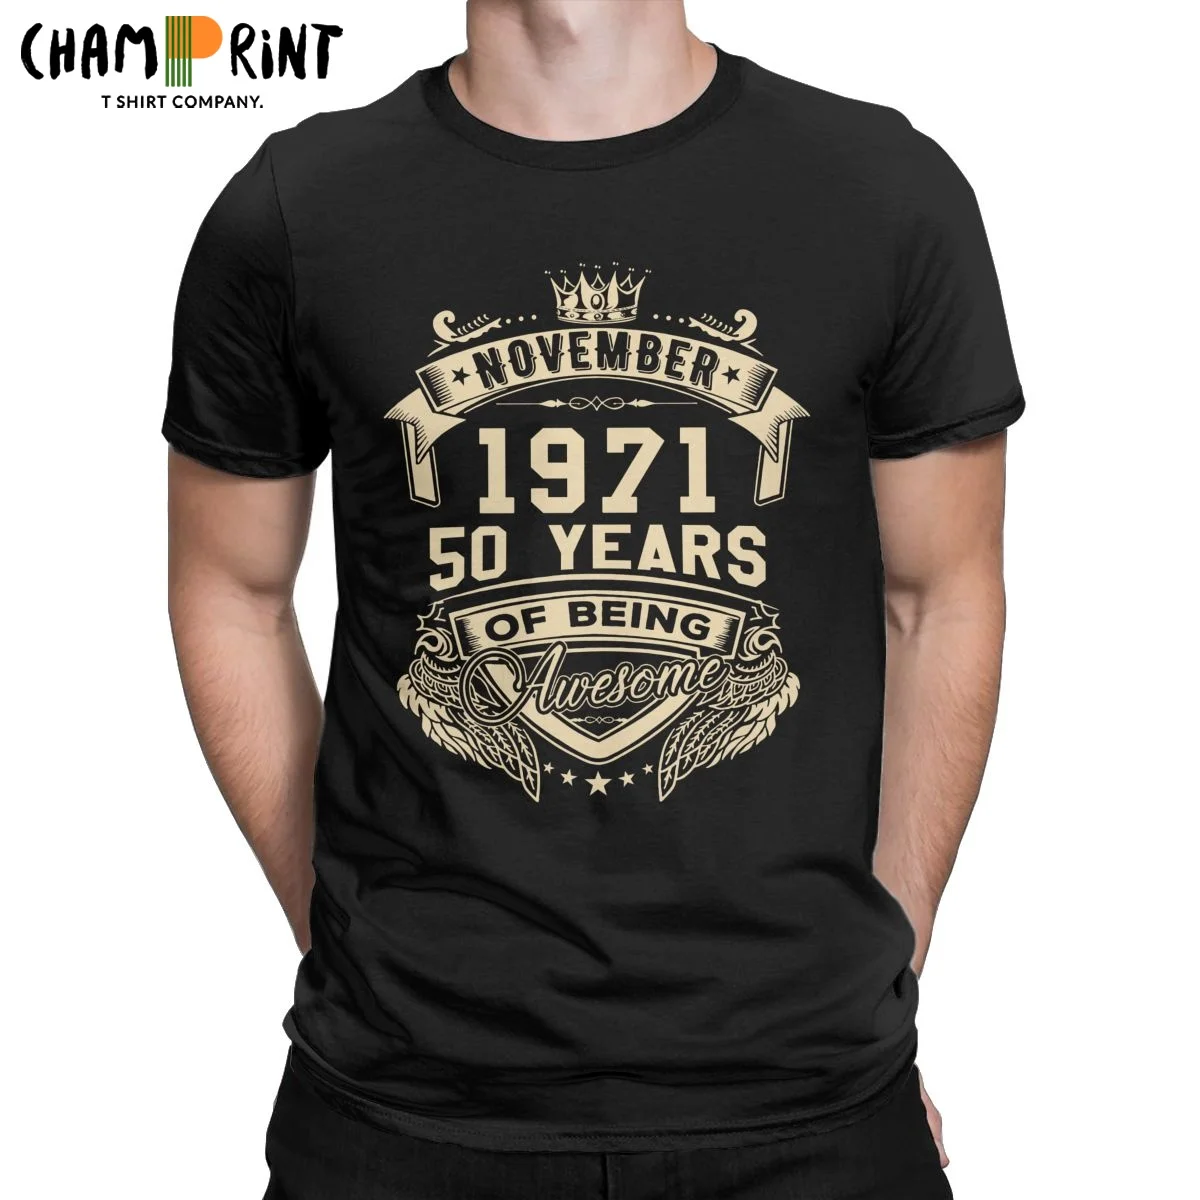 

Born In November 1971 50 Years Of Being Awesome Limited T-Shirt Men Funny 100% Cotton Tees Crew neck T Shirt Birthday Gift Tops